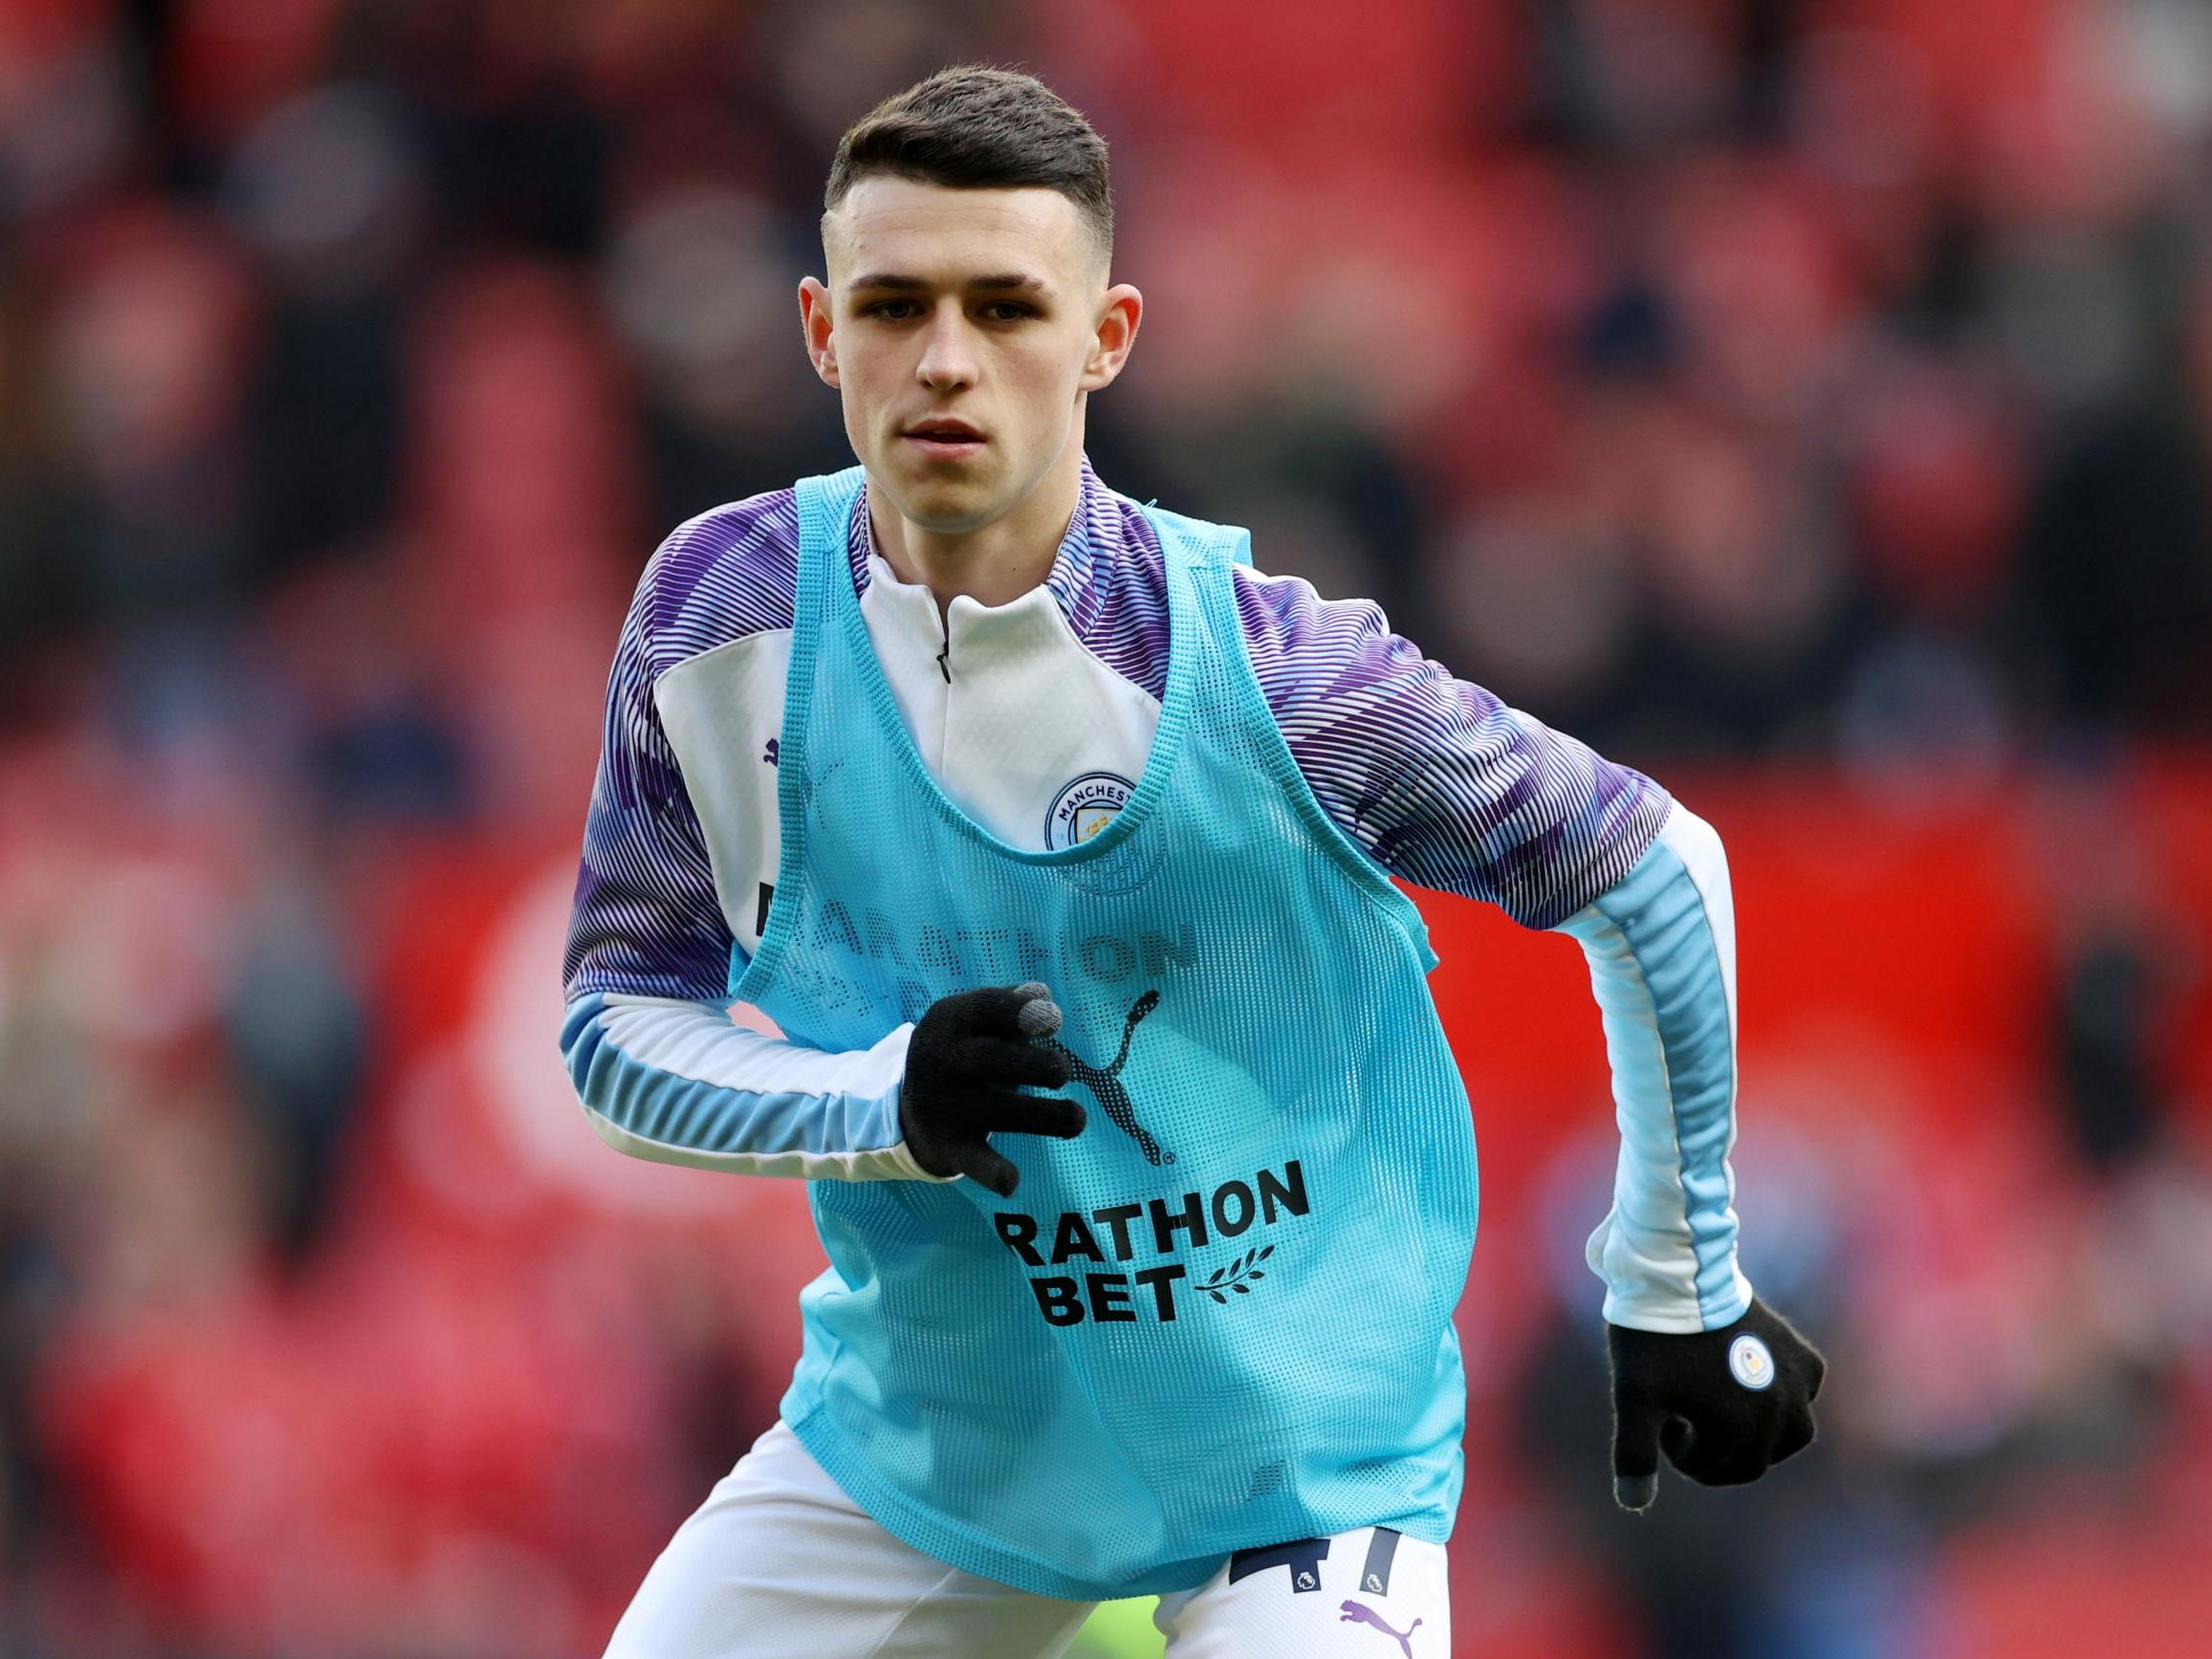 Phil Foden is one of England's most promising talents